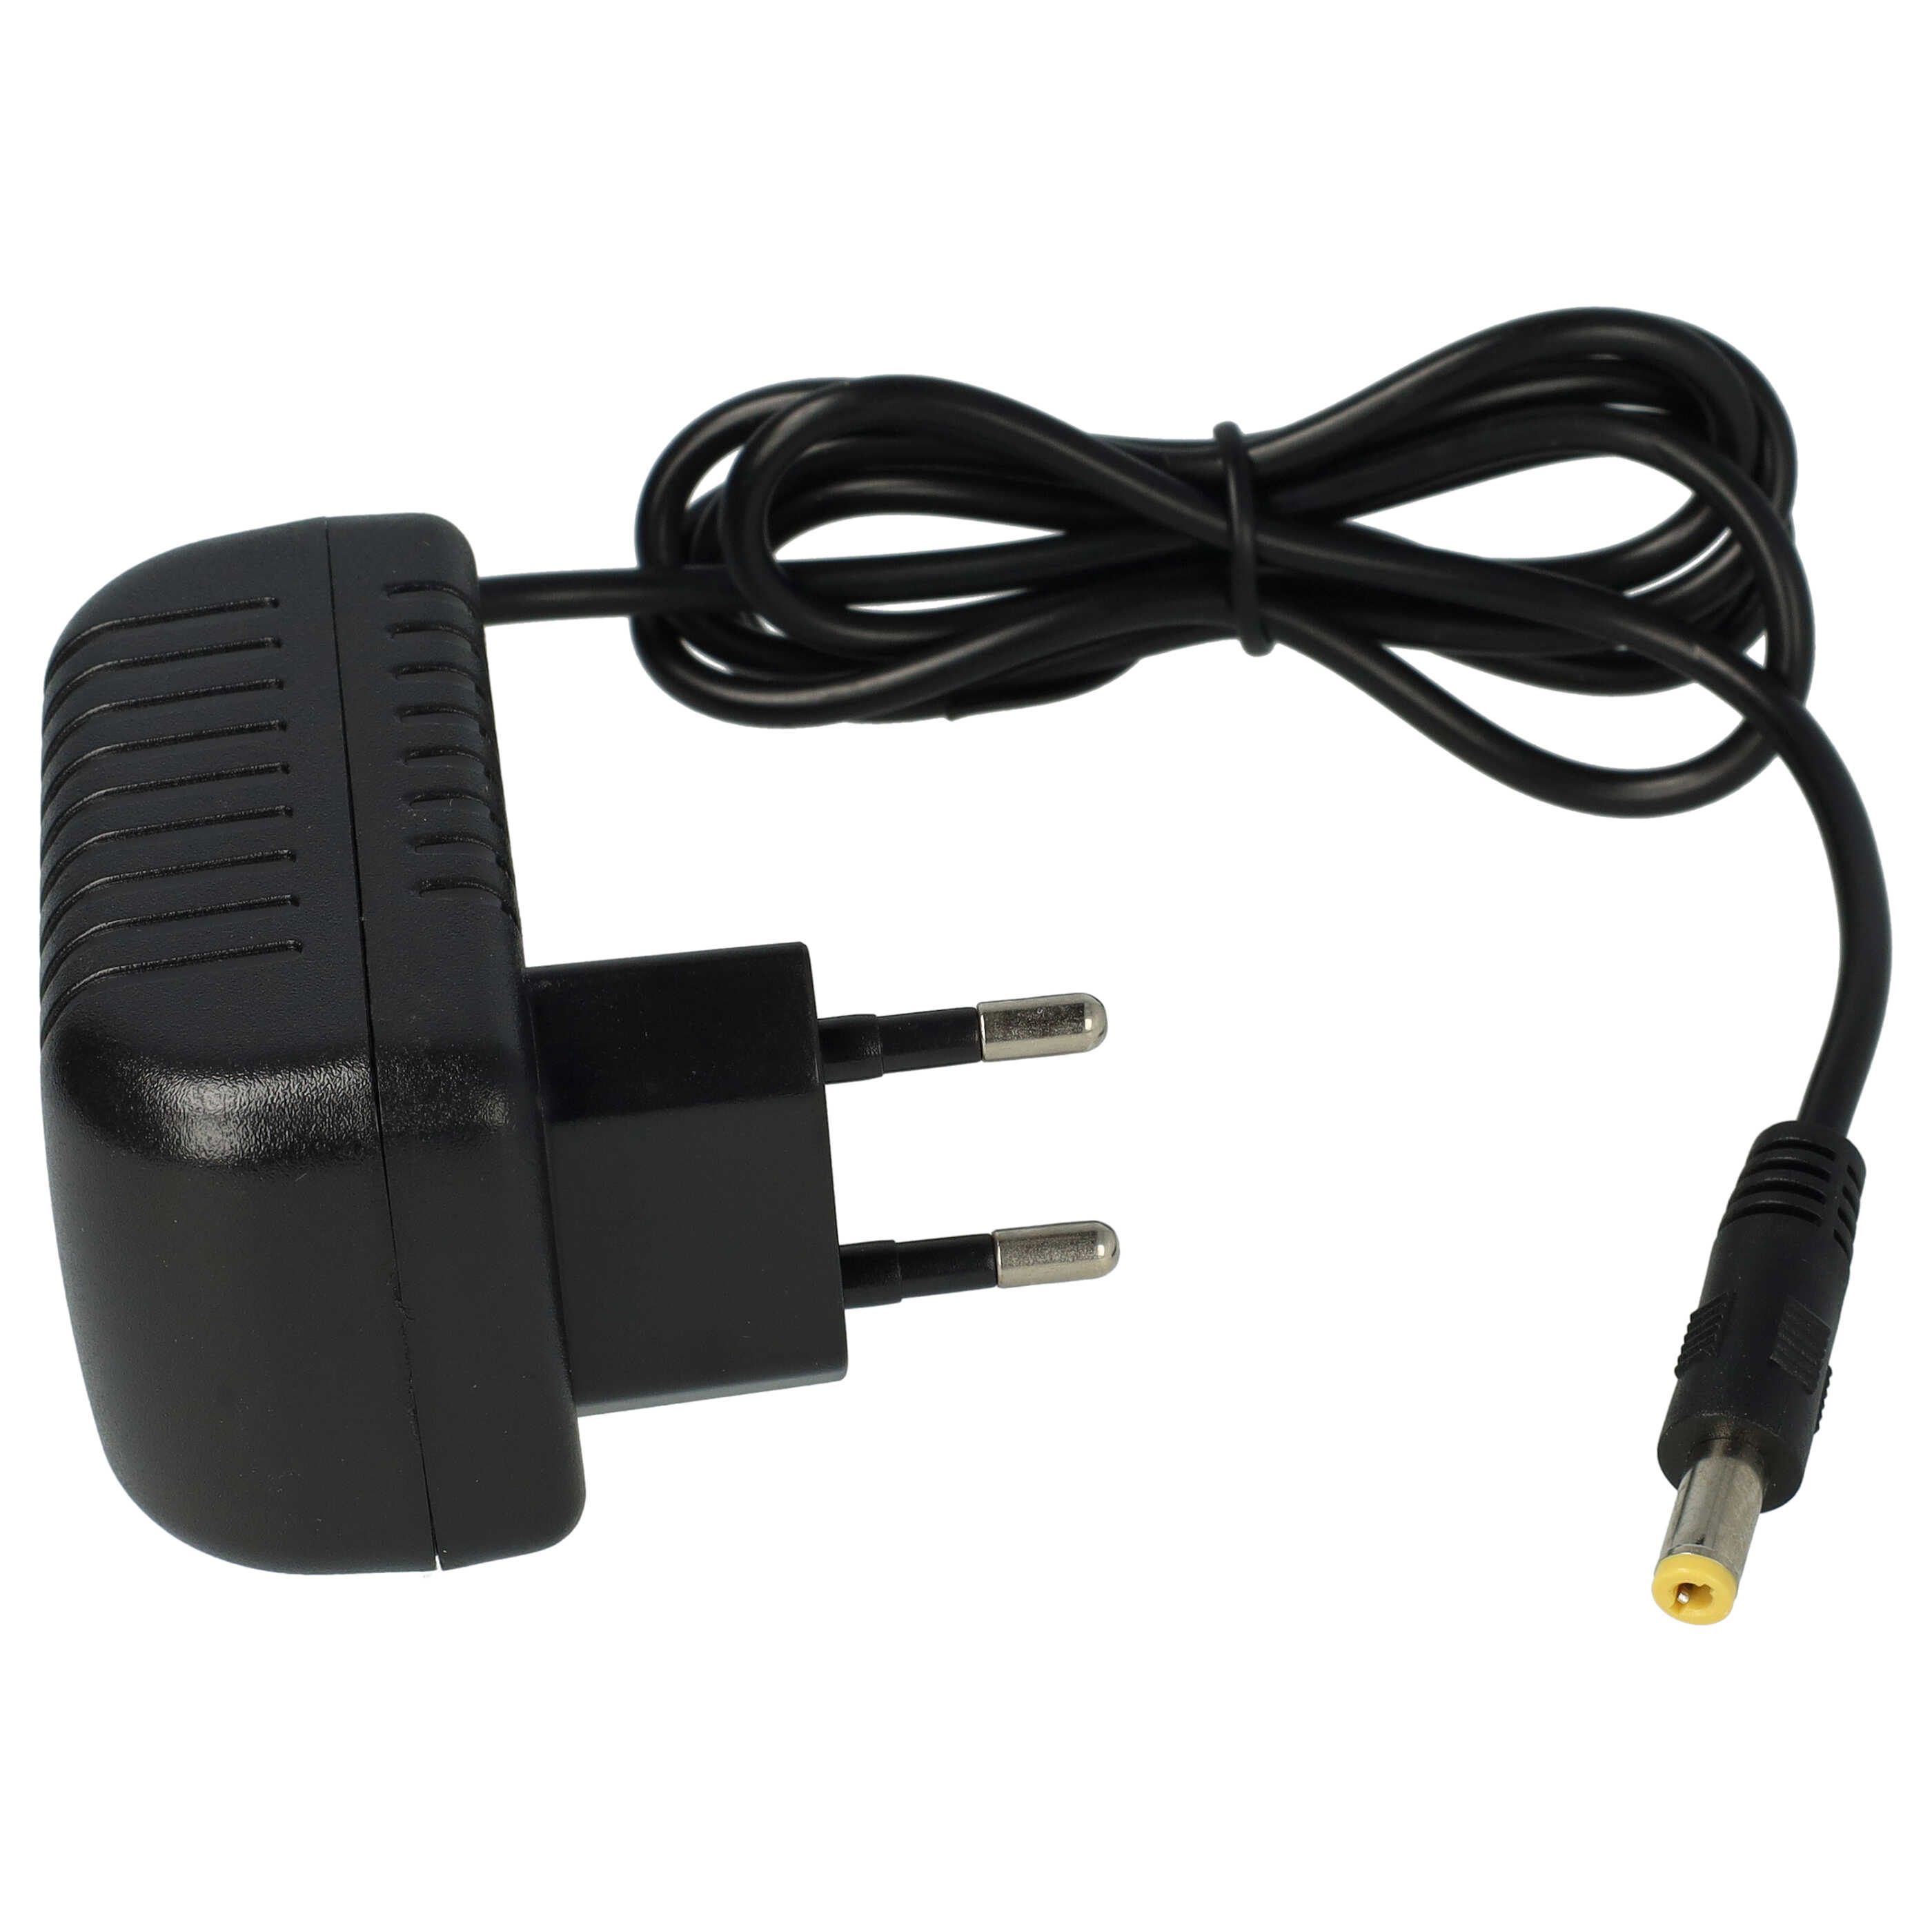 Mains Power Adapter suitable for 803a Vodafone speakers, router, hard drive etc. - 115 cm